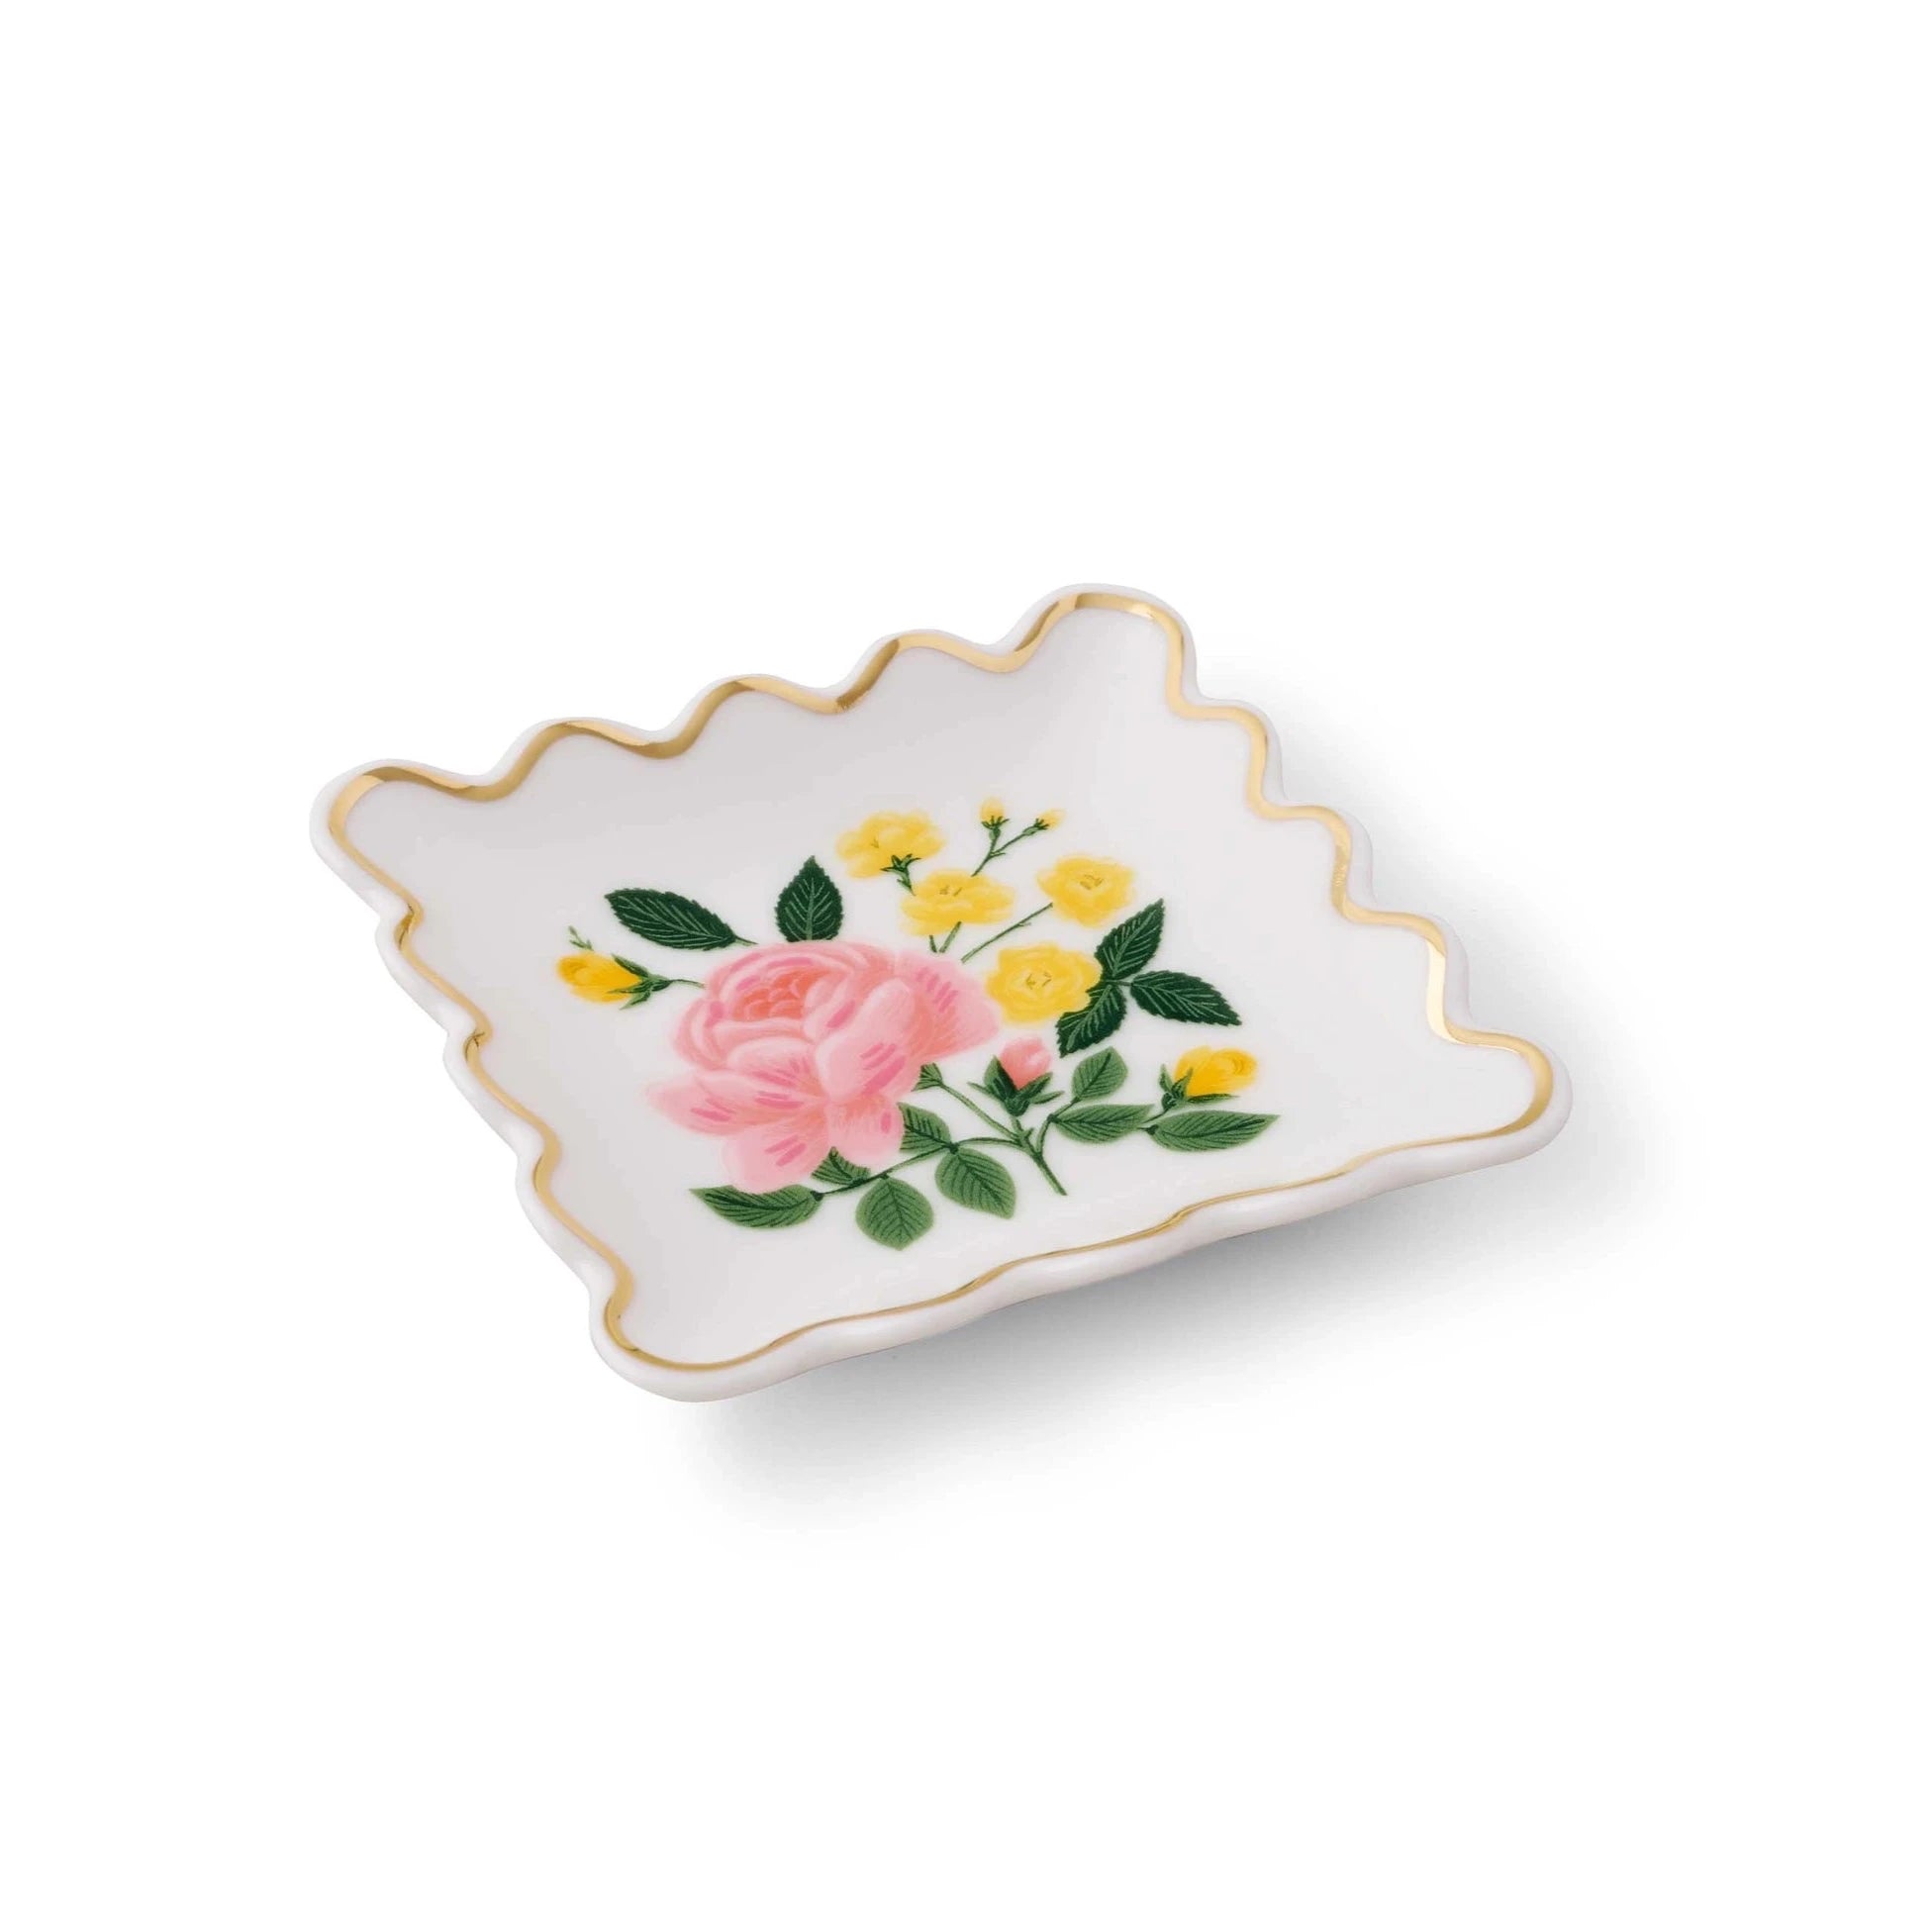 white rectangular ring dish with scalloped edges. in the center is a rose